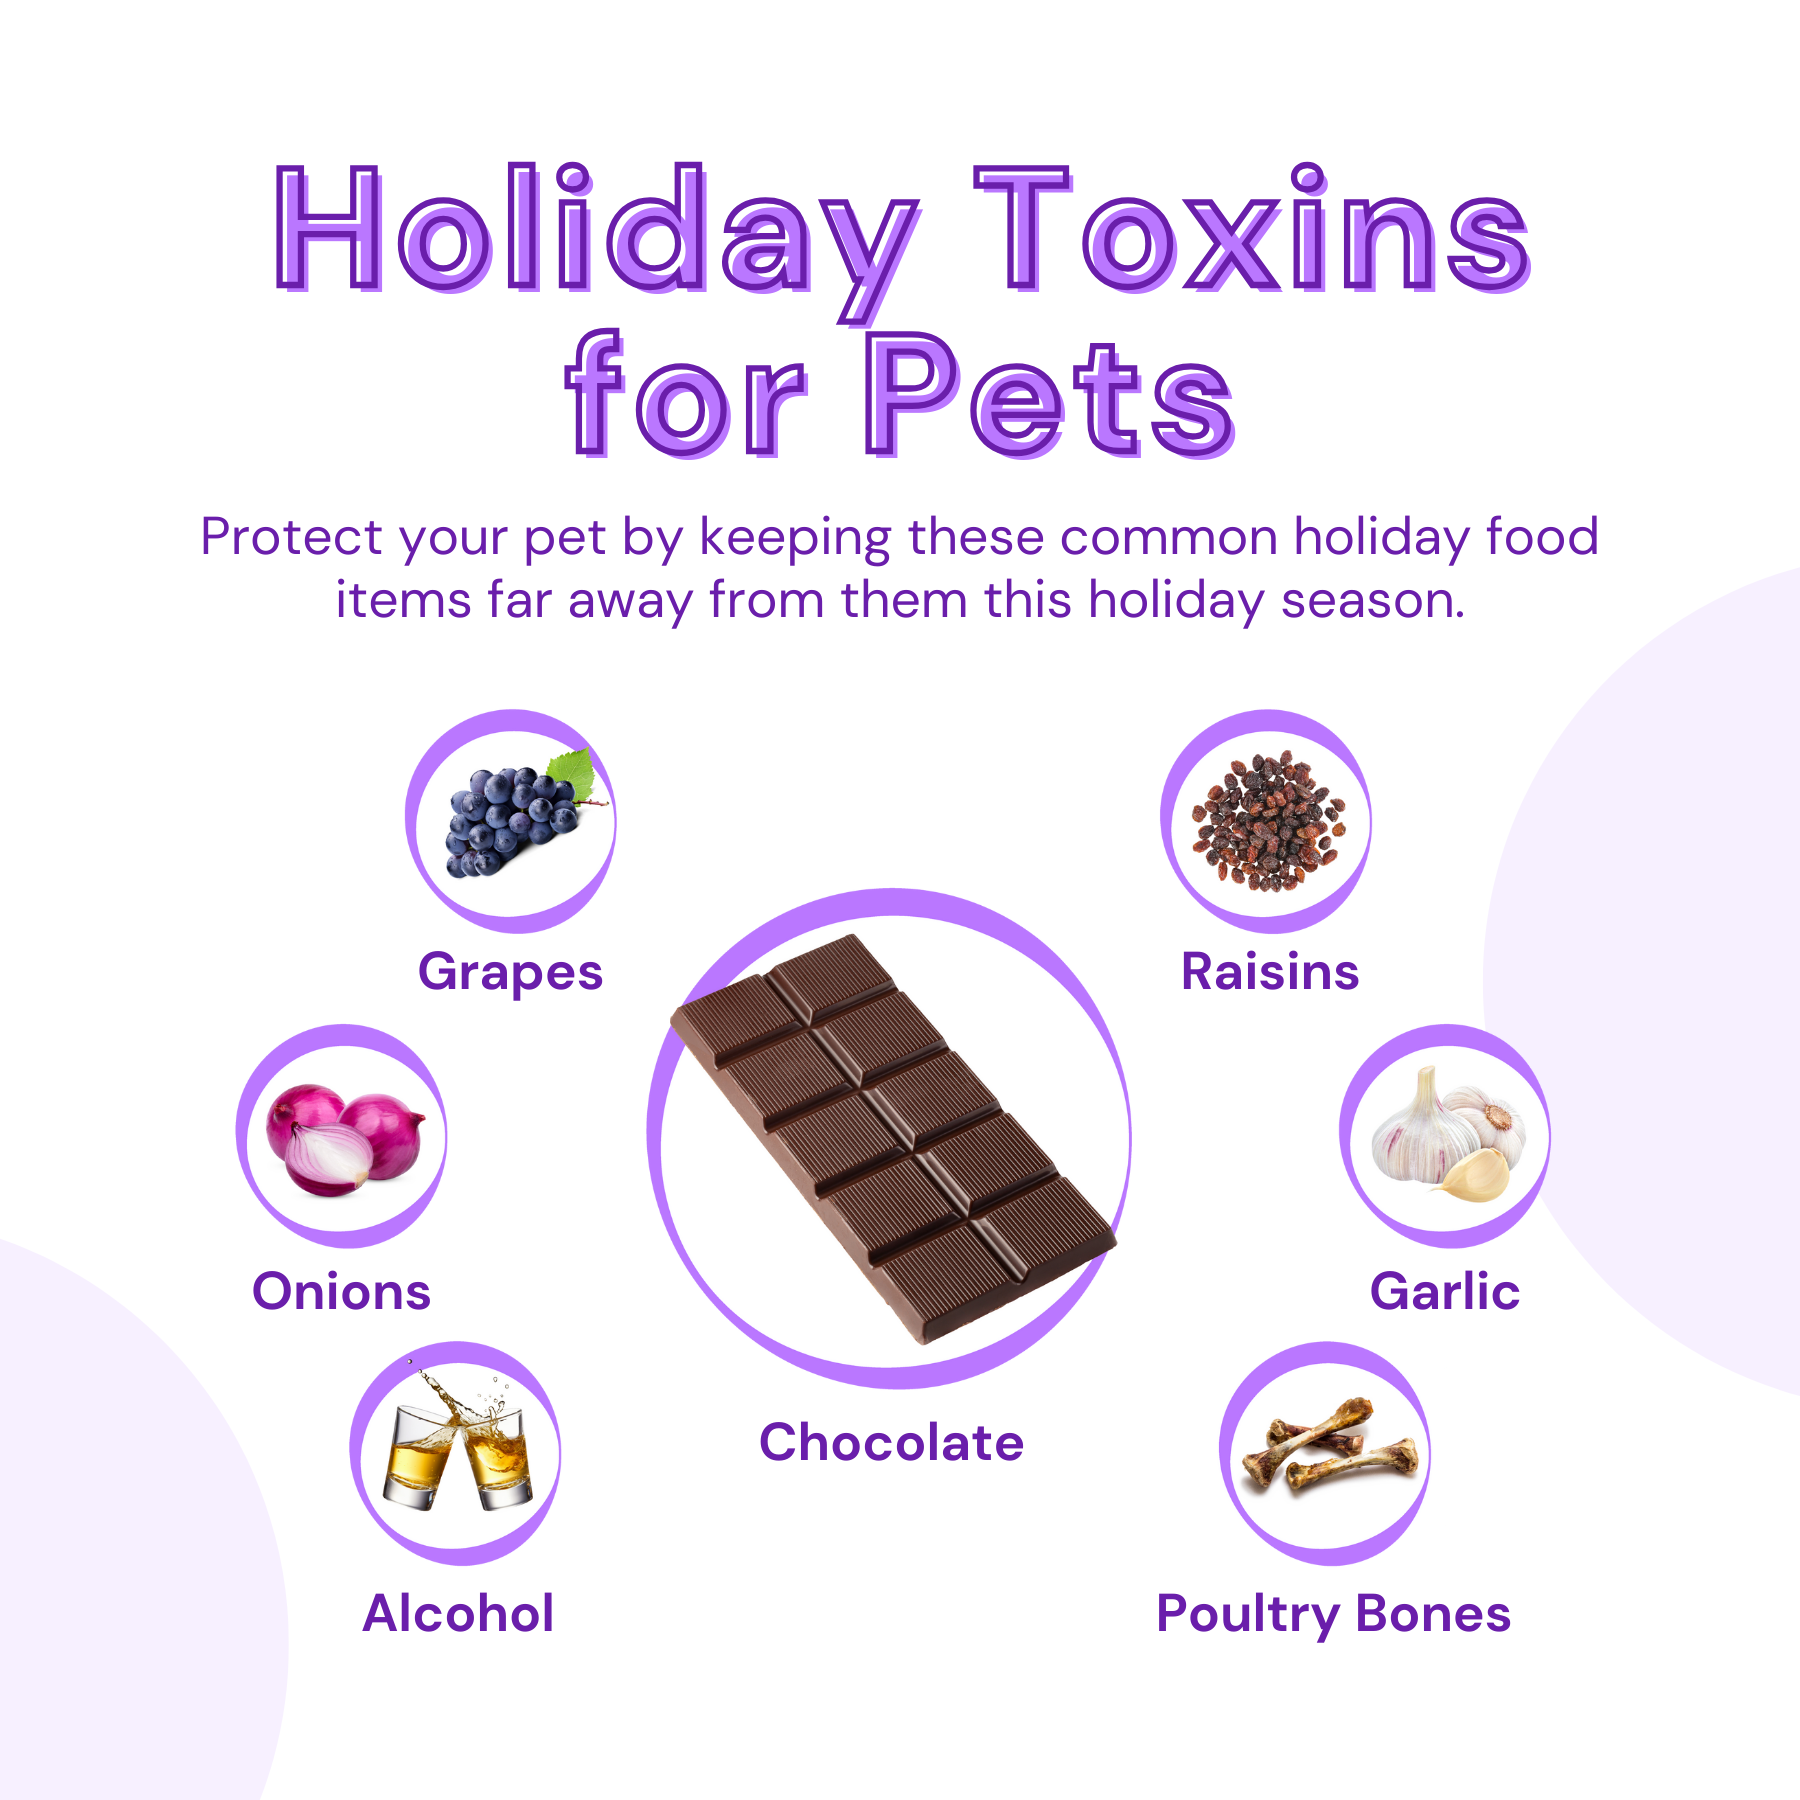 Holiday Toxins for Pets